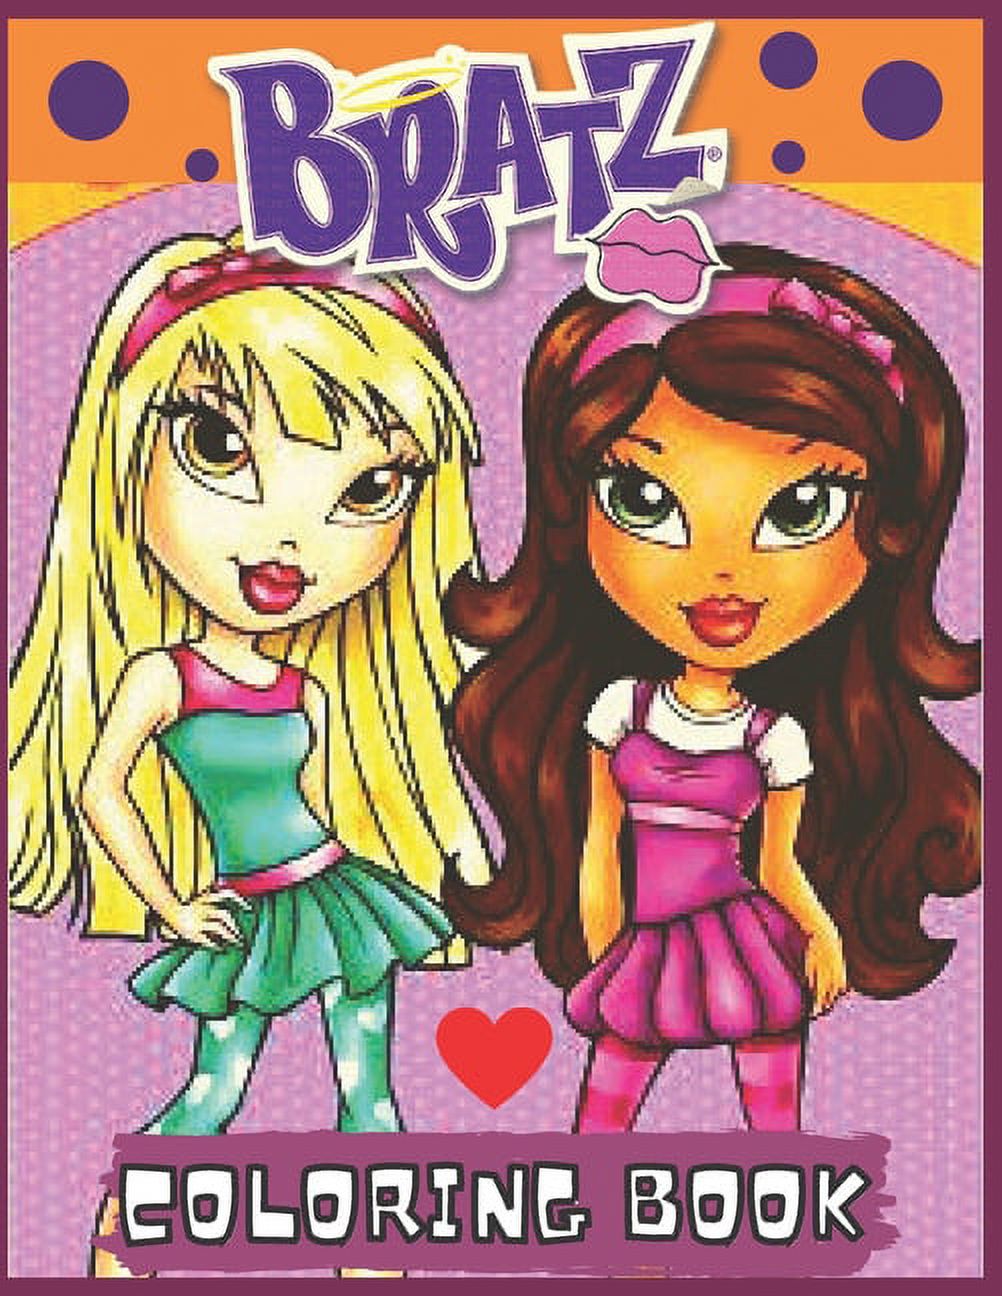 Bratz : Coloring book for children and adults fun, easy and comfortable  (coloring book for adults and children 2-4 4-8 8-12) wonderful and